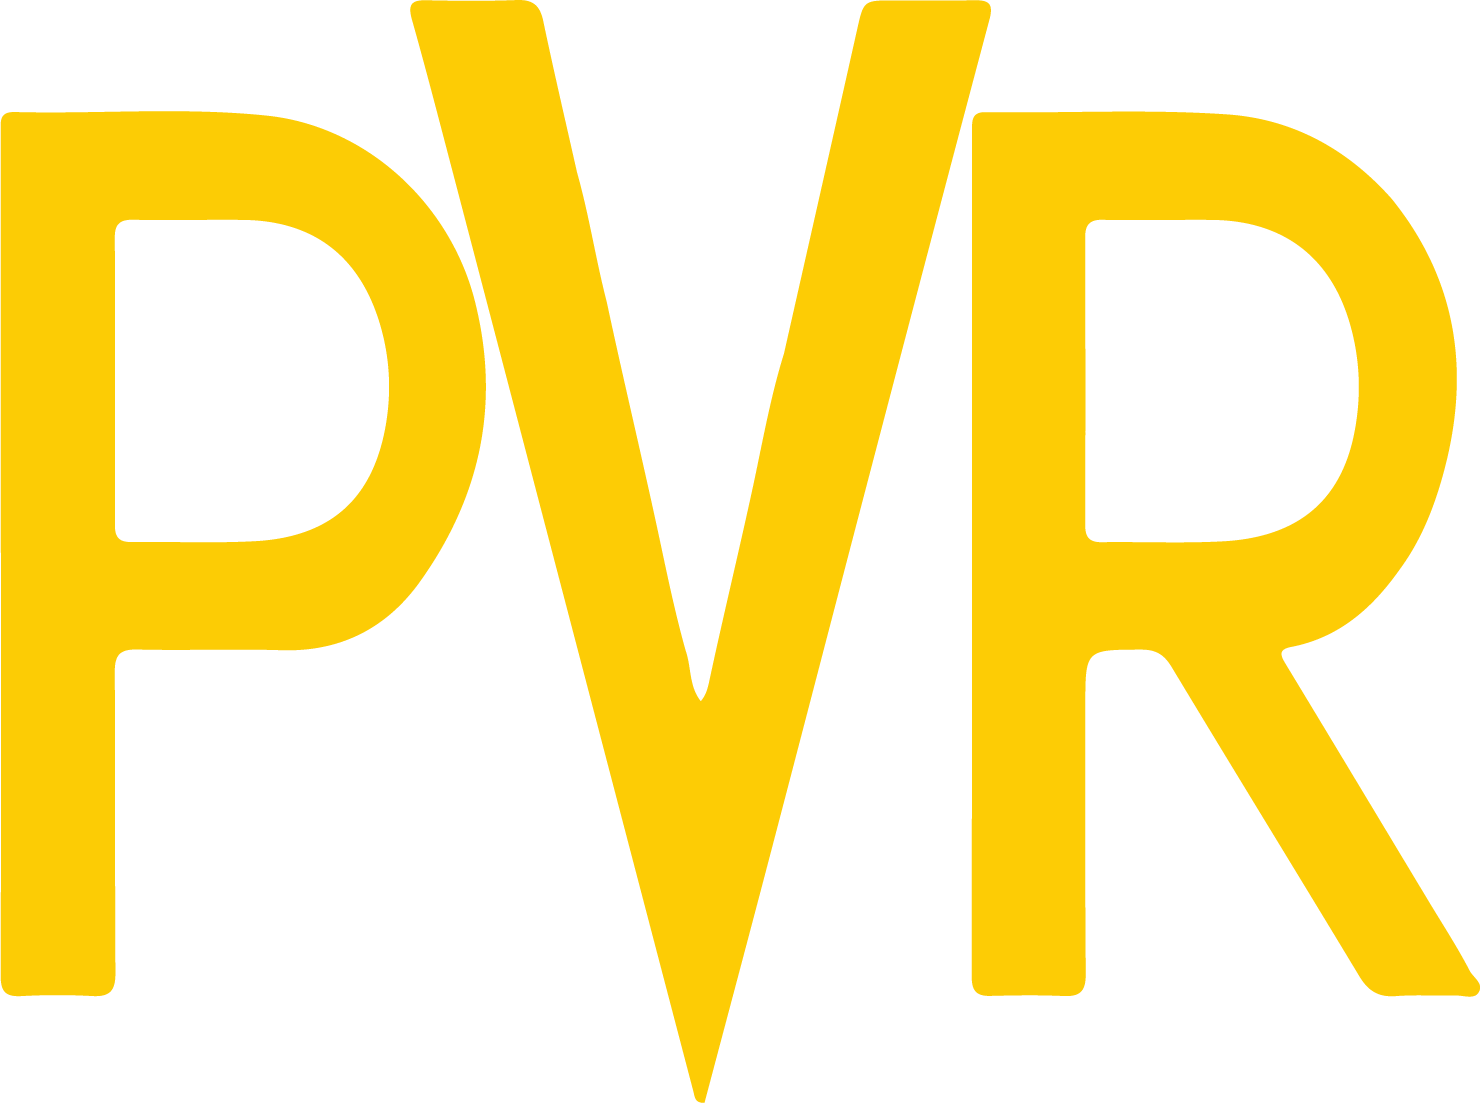 PVR Launches A New Digital Campaign; There Is Something About PVR!